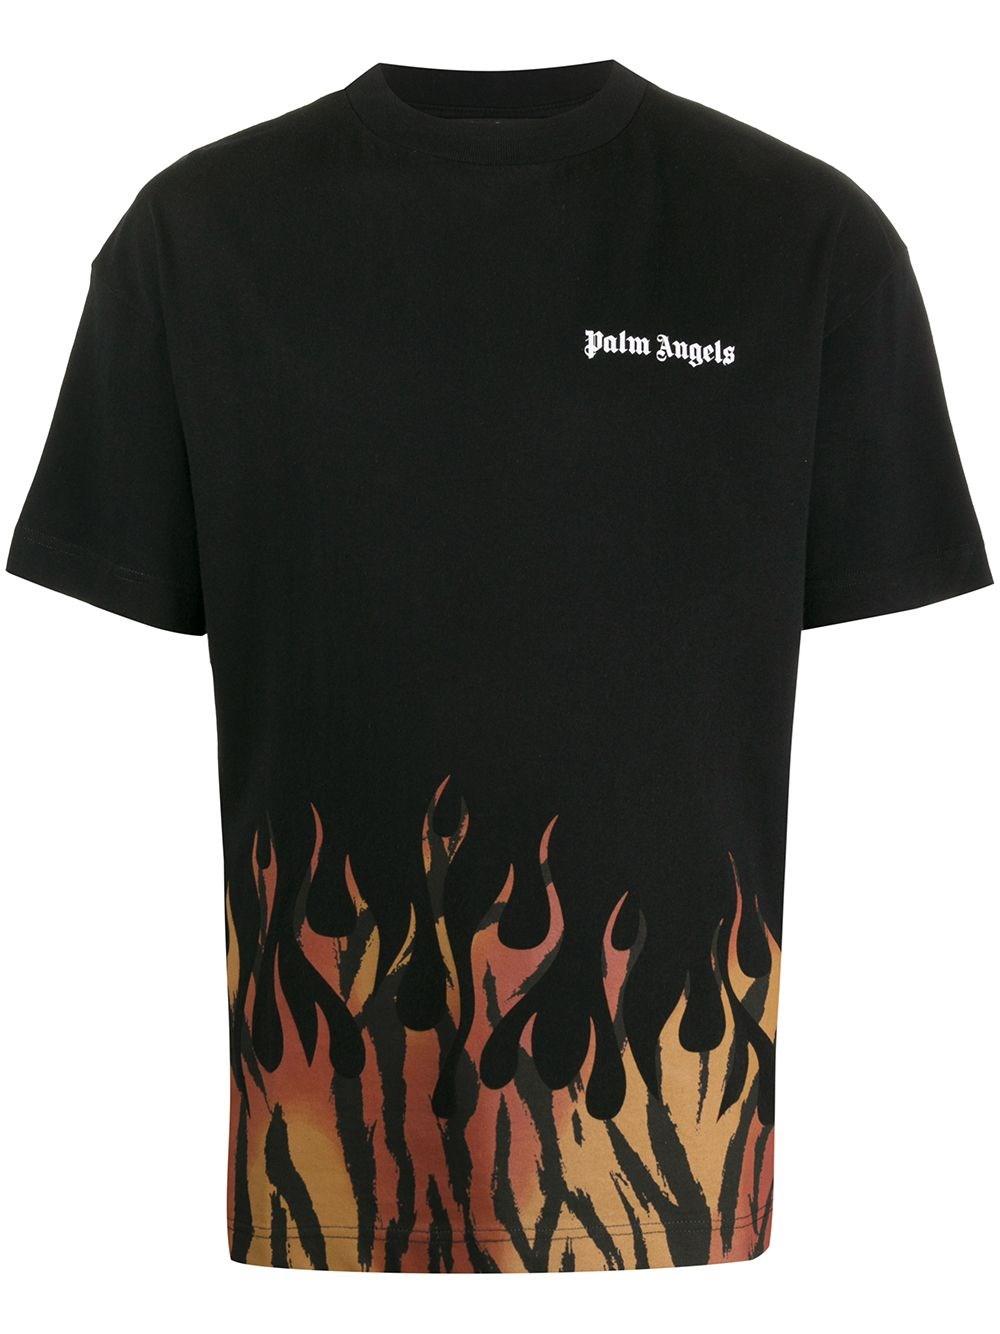 Palm Angels Flame-print Cotton-jersey T-shirt in Black for Men